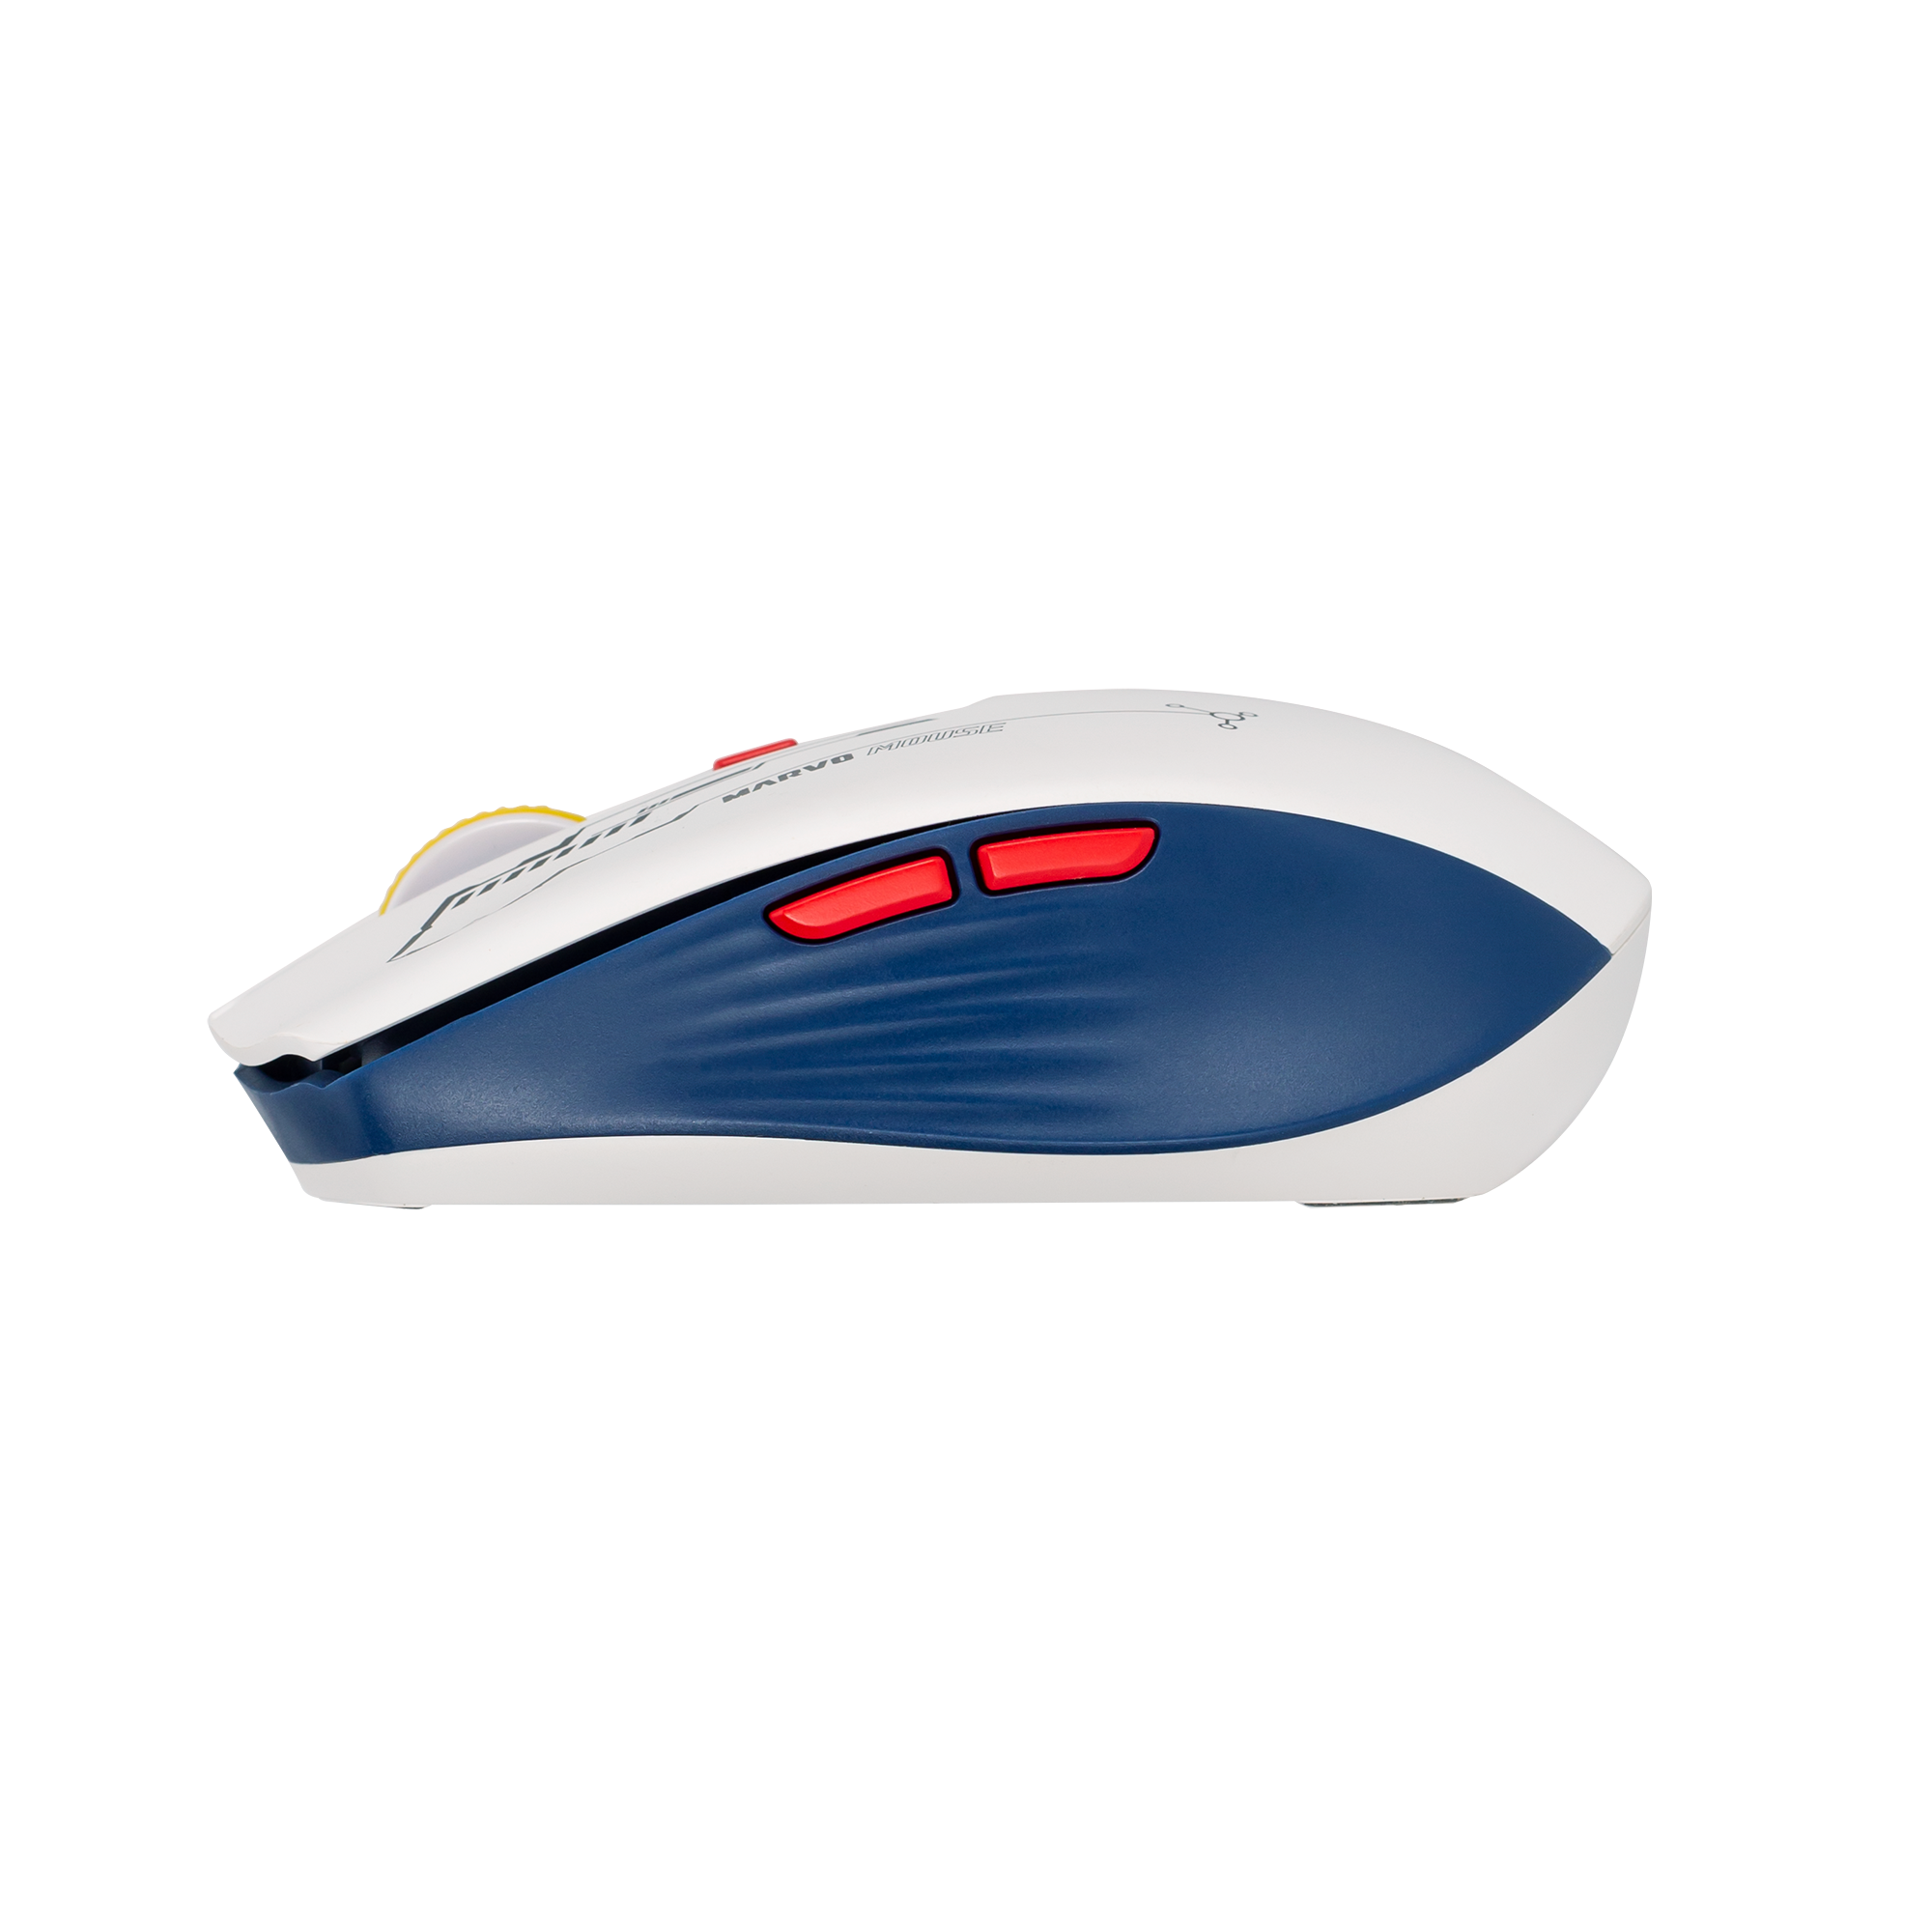 M796W  GAMING MOUSE